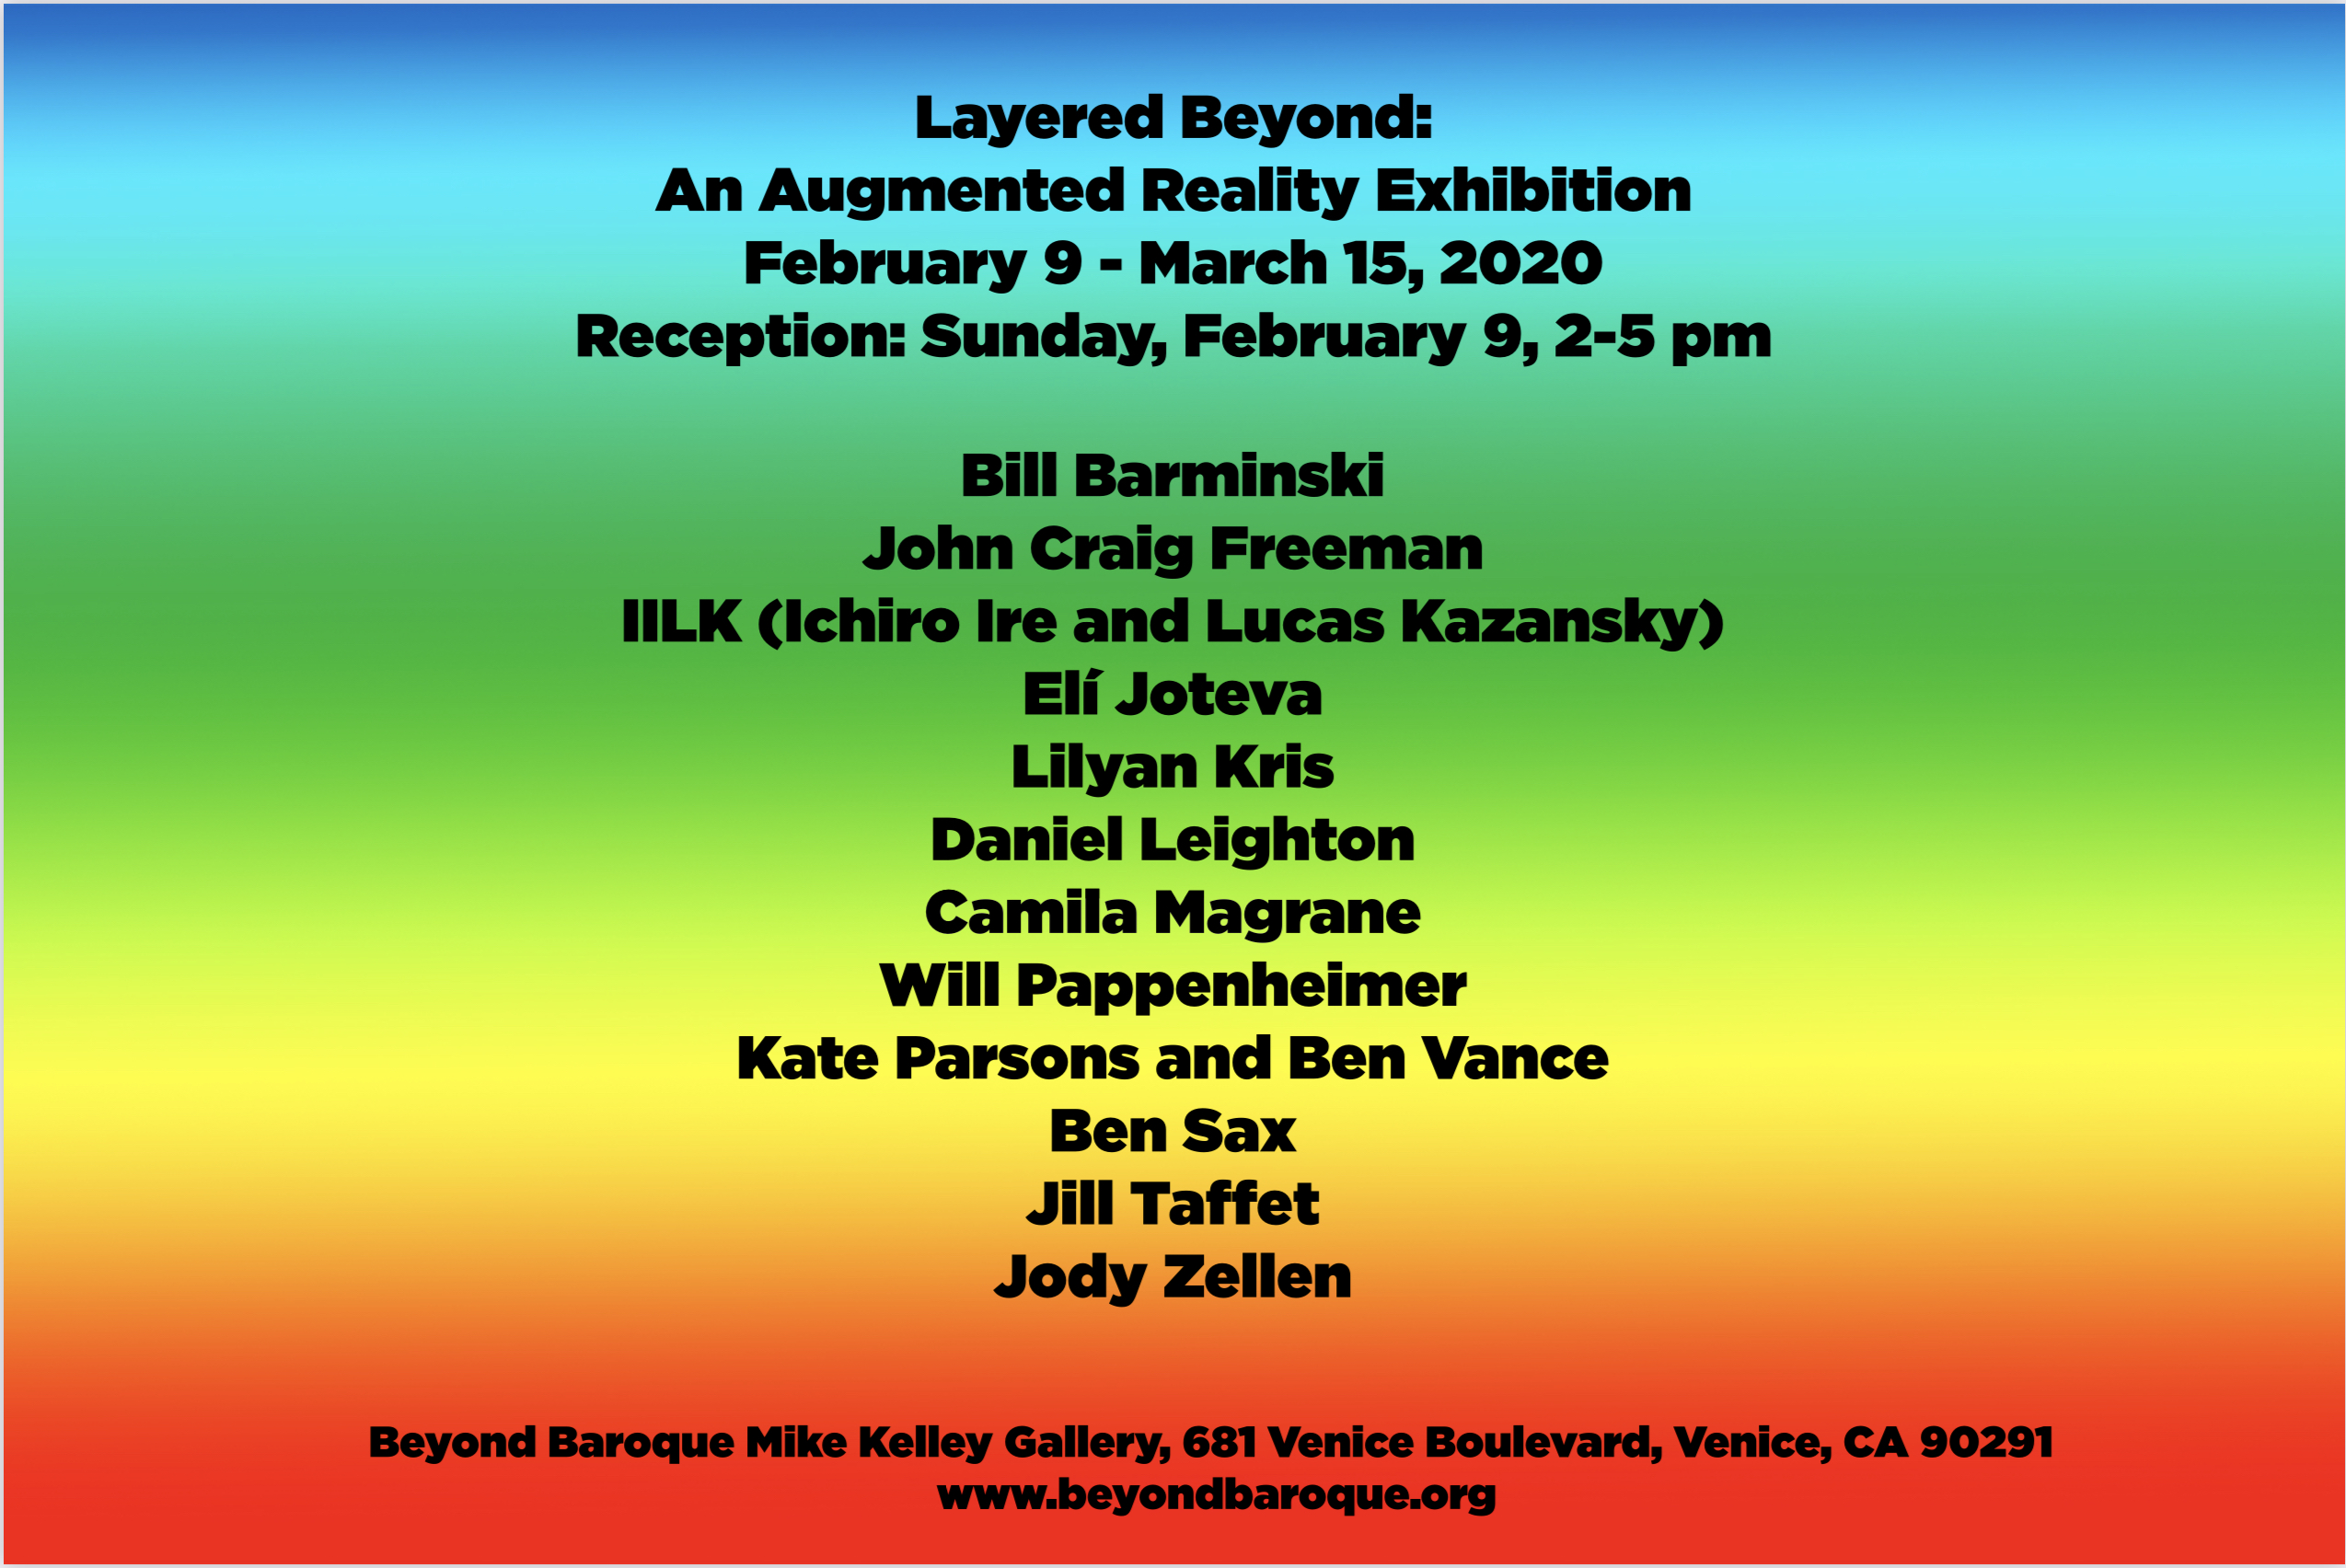 Layered Beyond: An Augmented Reality Art Exhibition